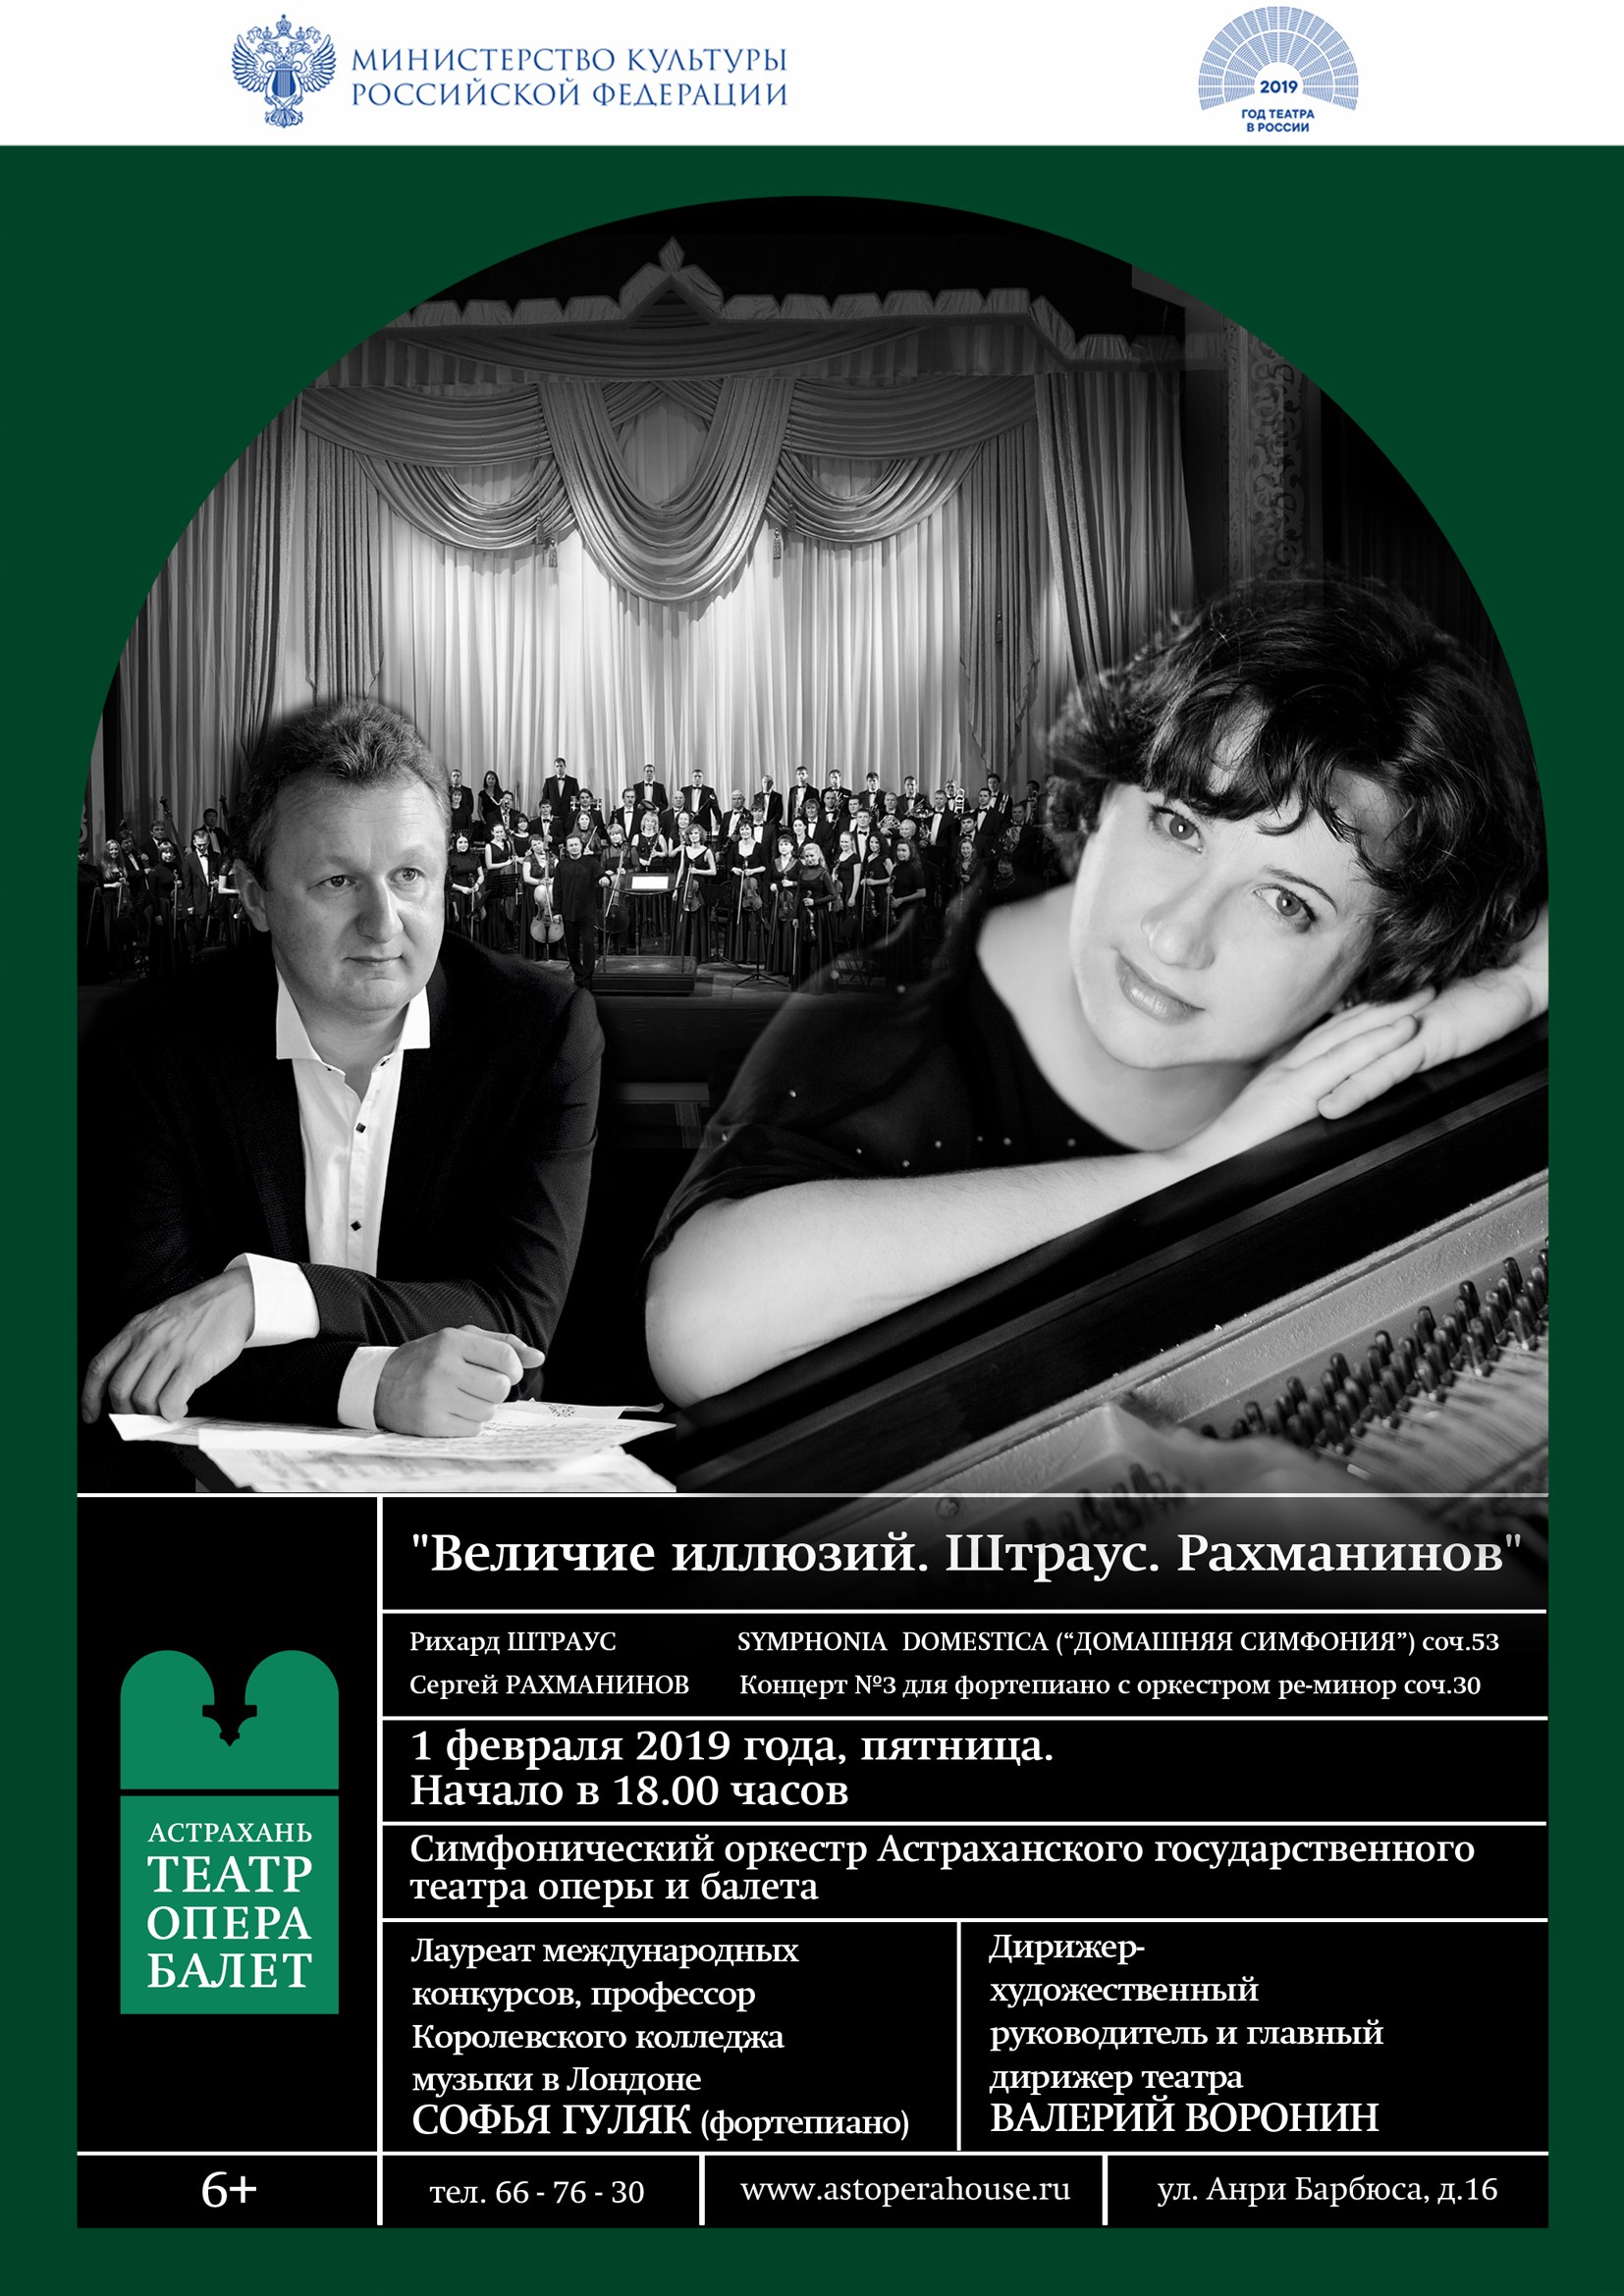 "Home Symphon"Home Symphony" by Richard Strauss will be performed for the first time in Astrakhan on February, 1